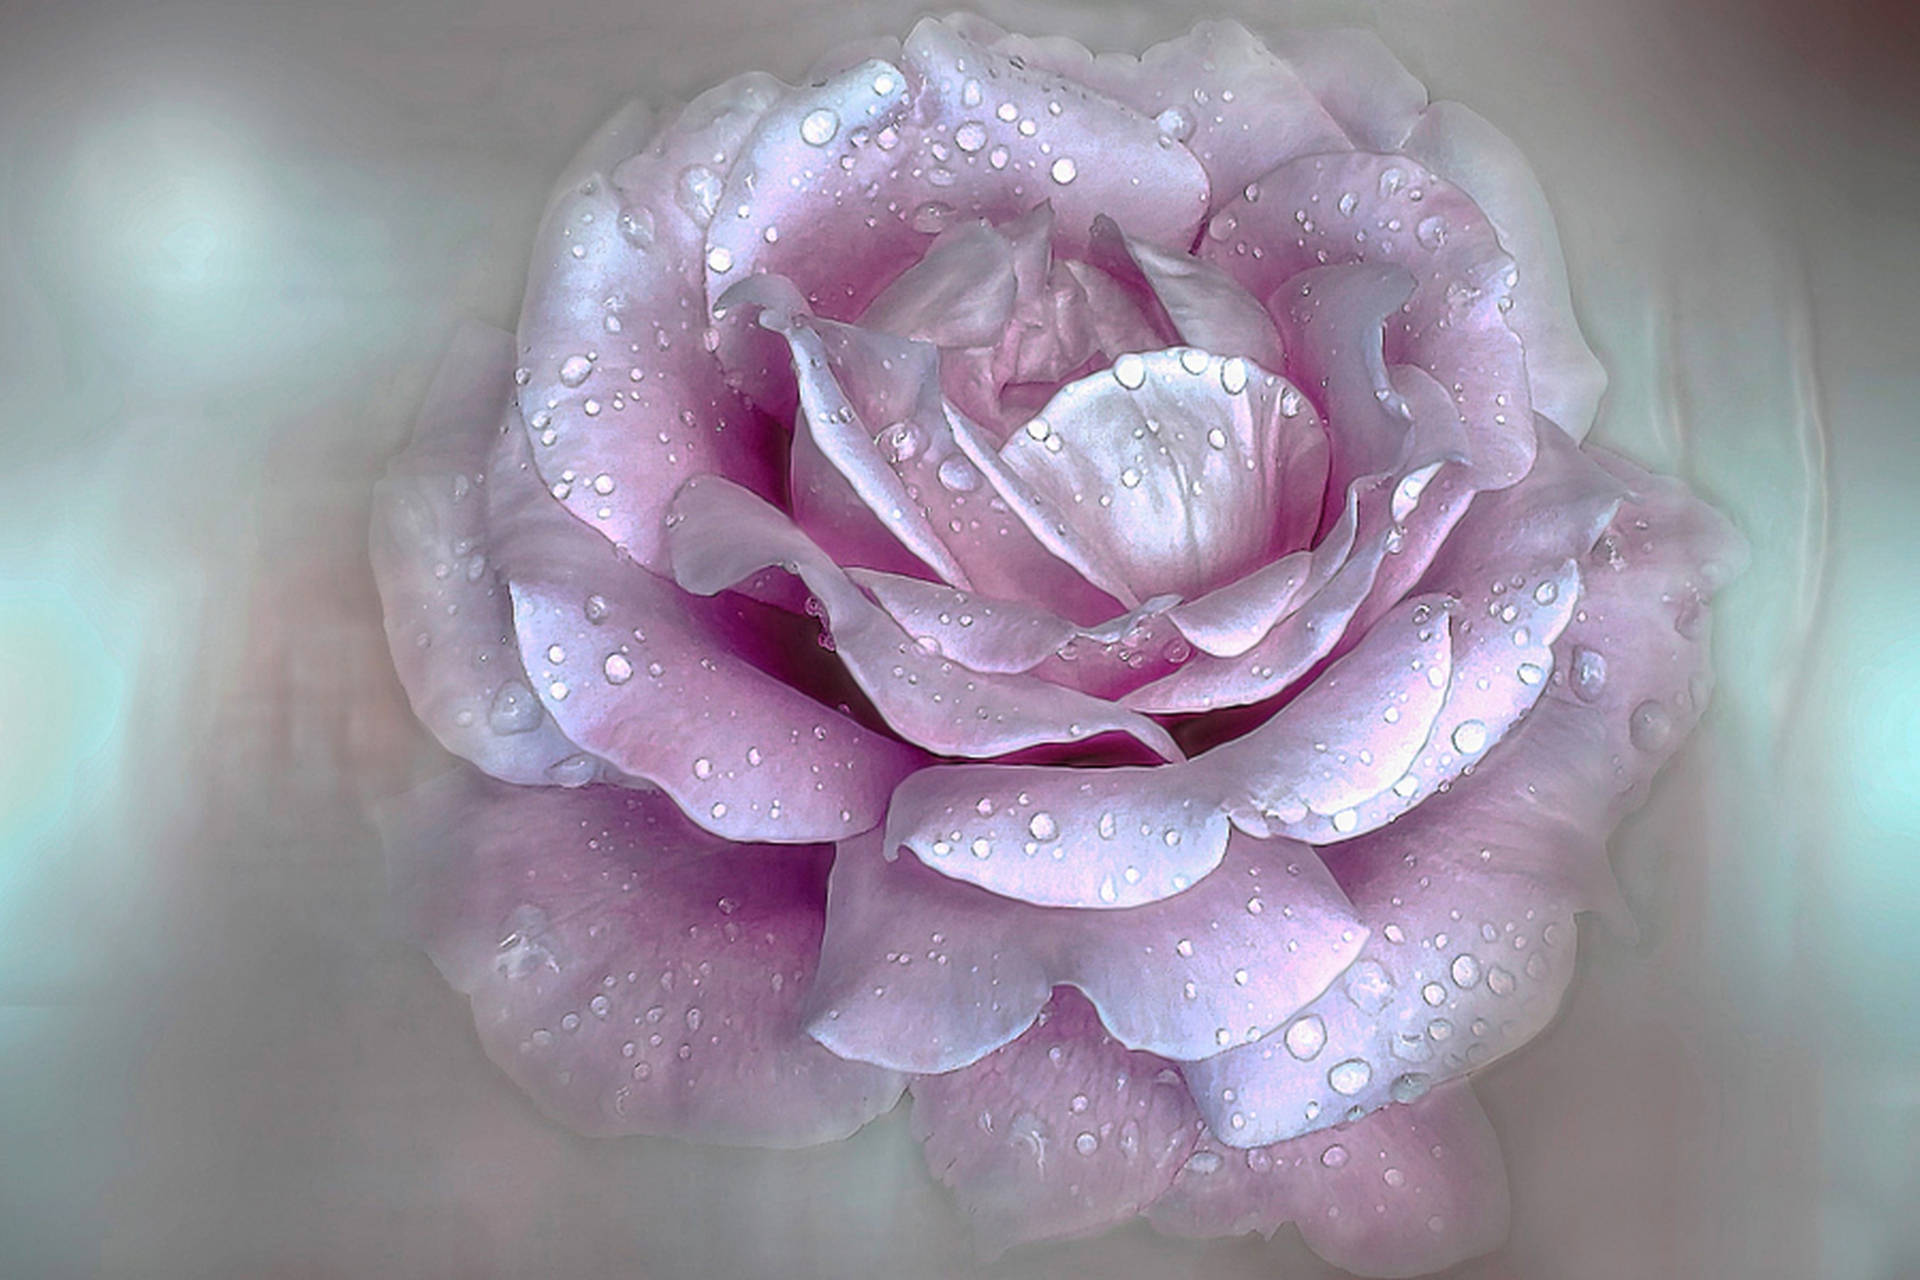 Light Pink Flowers Aesthetic Wallpapers